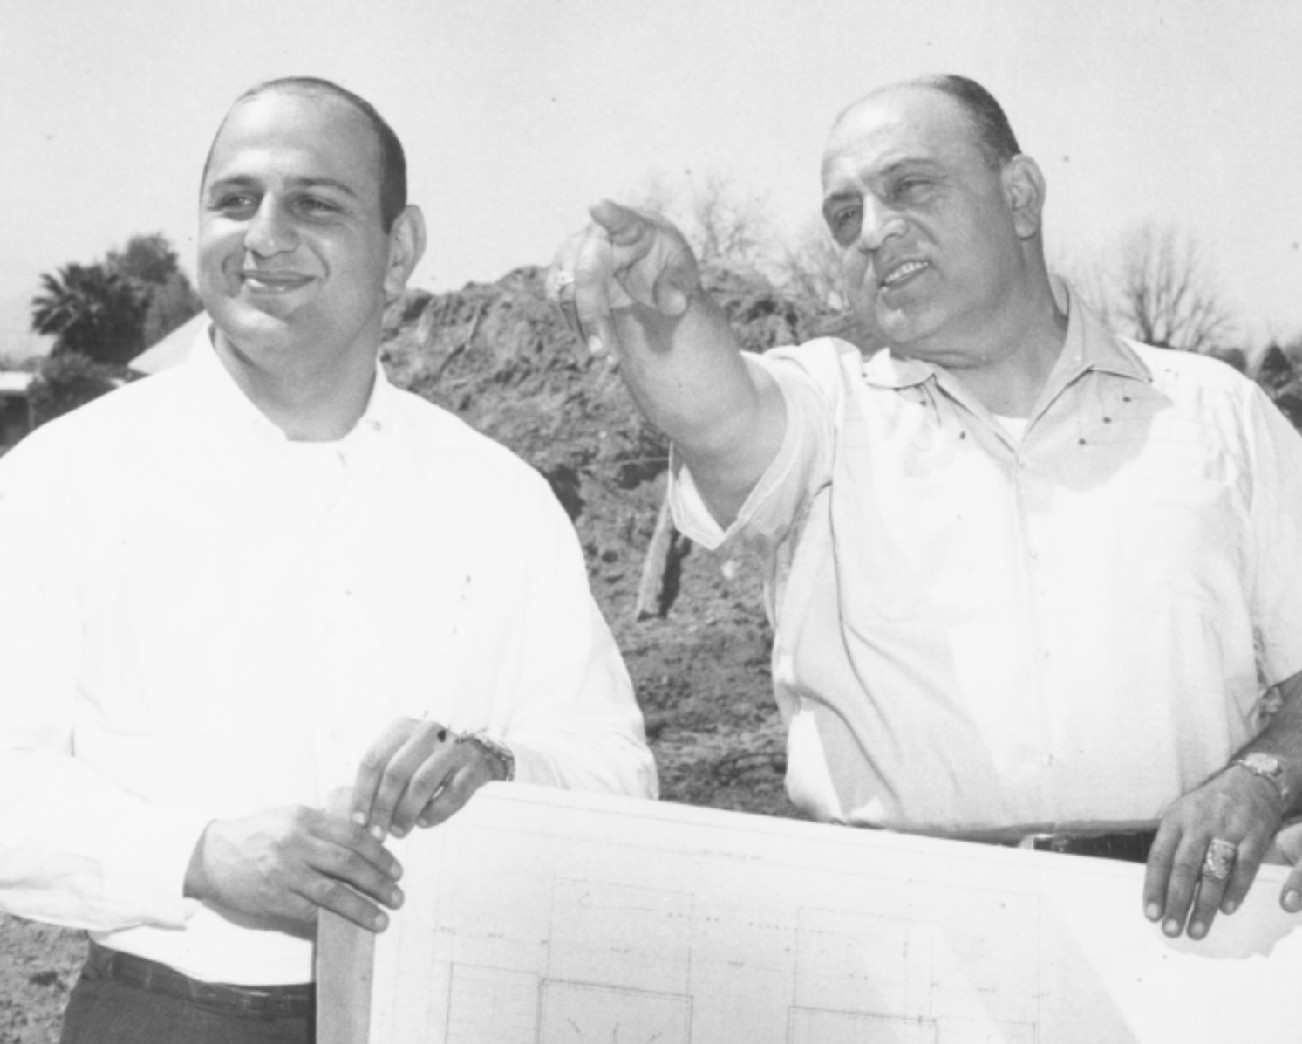  Eddie Basha Jr. holds what looks like building plans on a construction site with his father, Eddie Basha Sr.